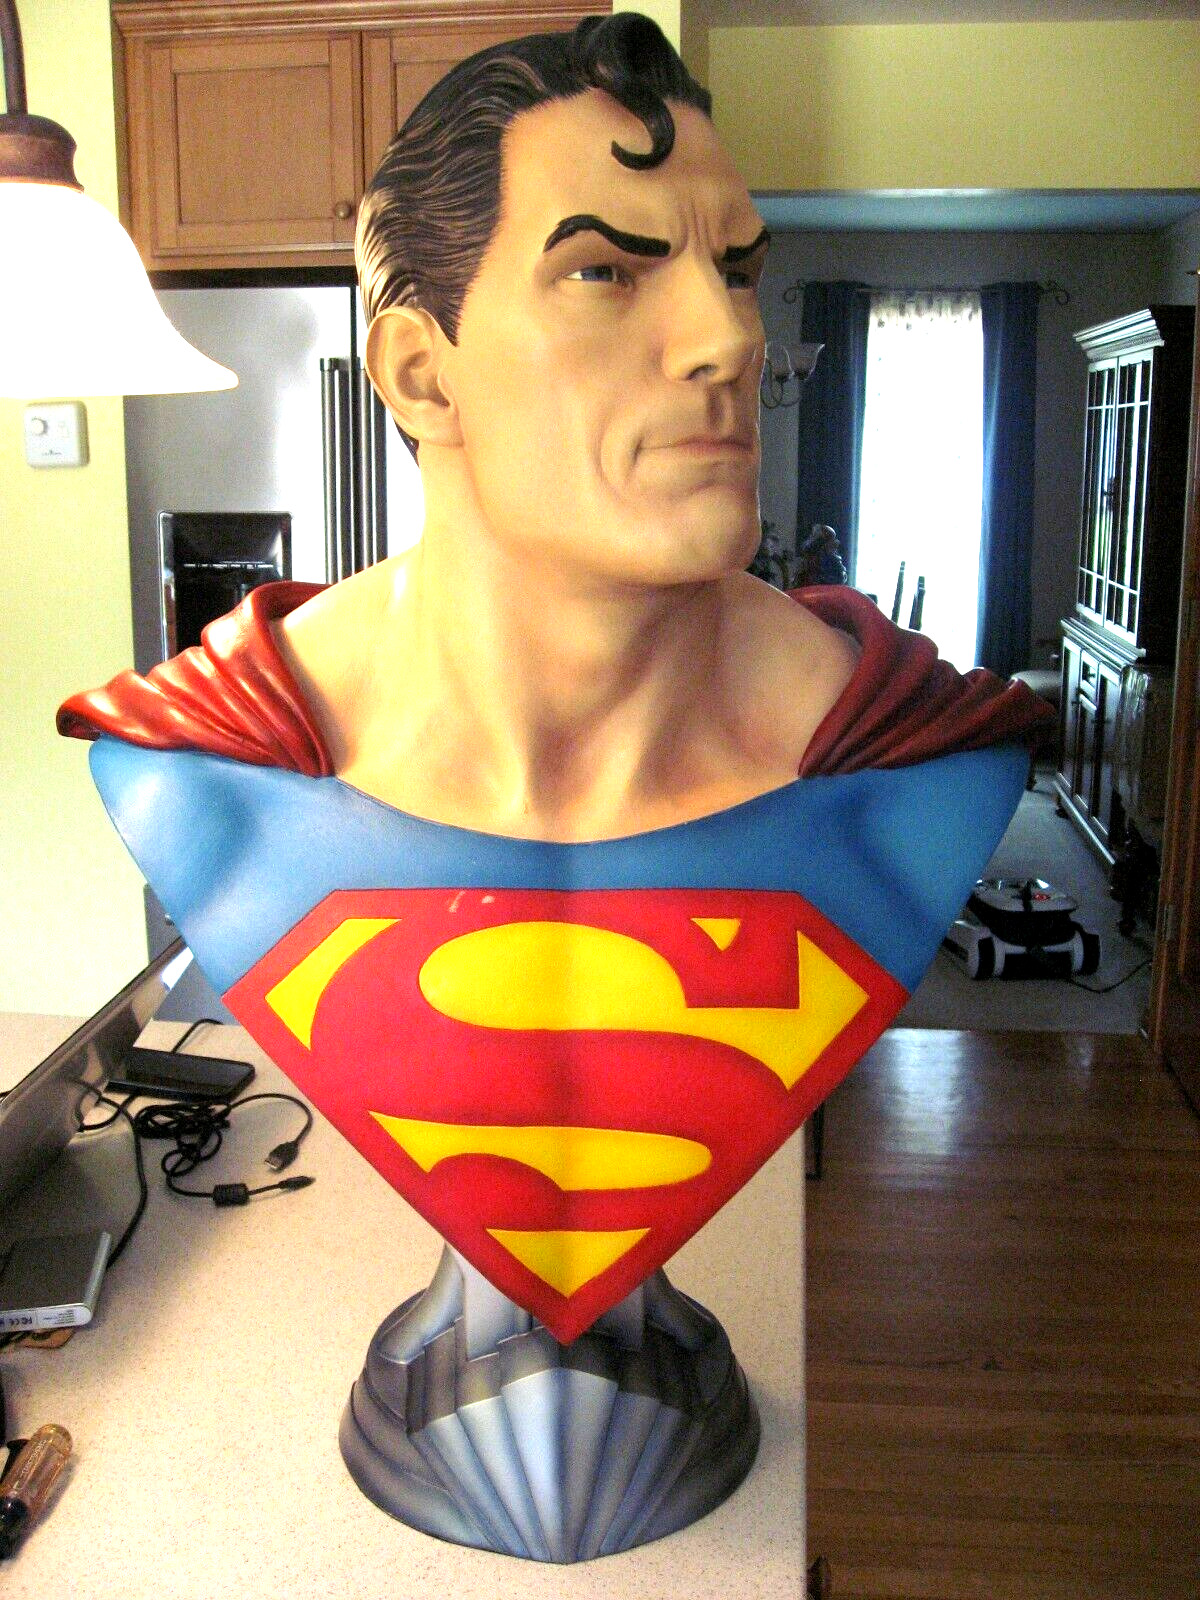 Sideshow Collectibles Superman Life-size 1/1 Scale Bust DC Comics 265 of 1500